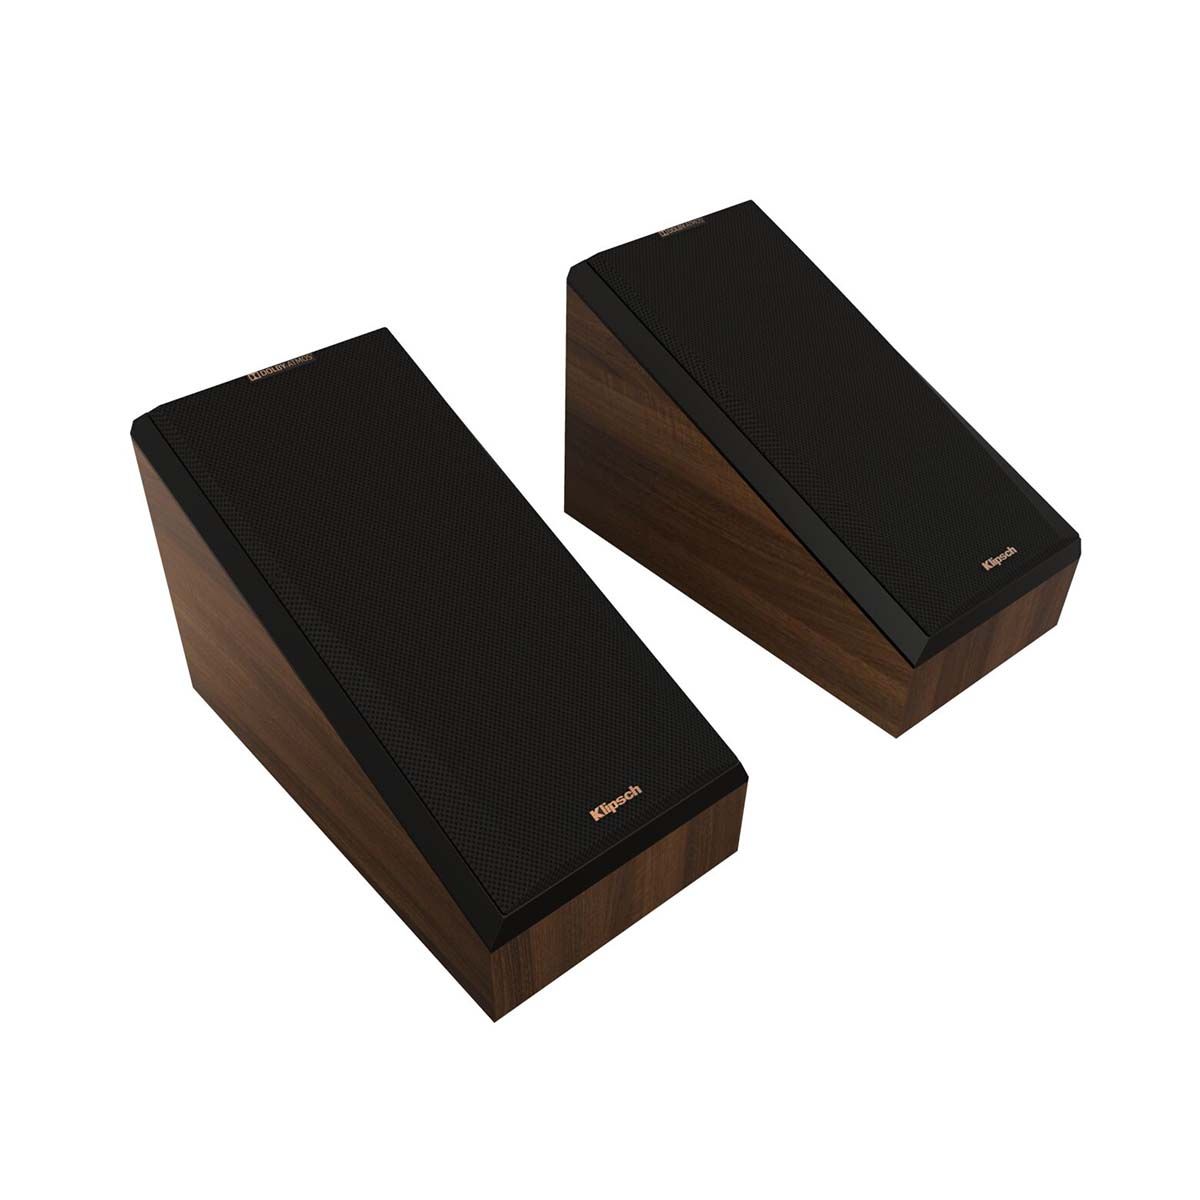 Klipsch RP-500SA II Surround/Atmos Speakers - Walnut - Pair - angled top view of pair with grills